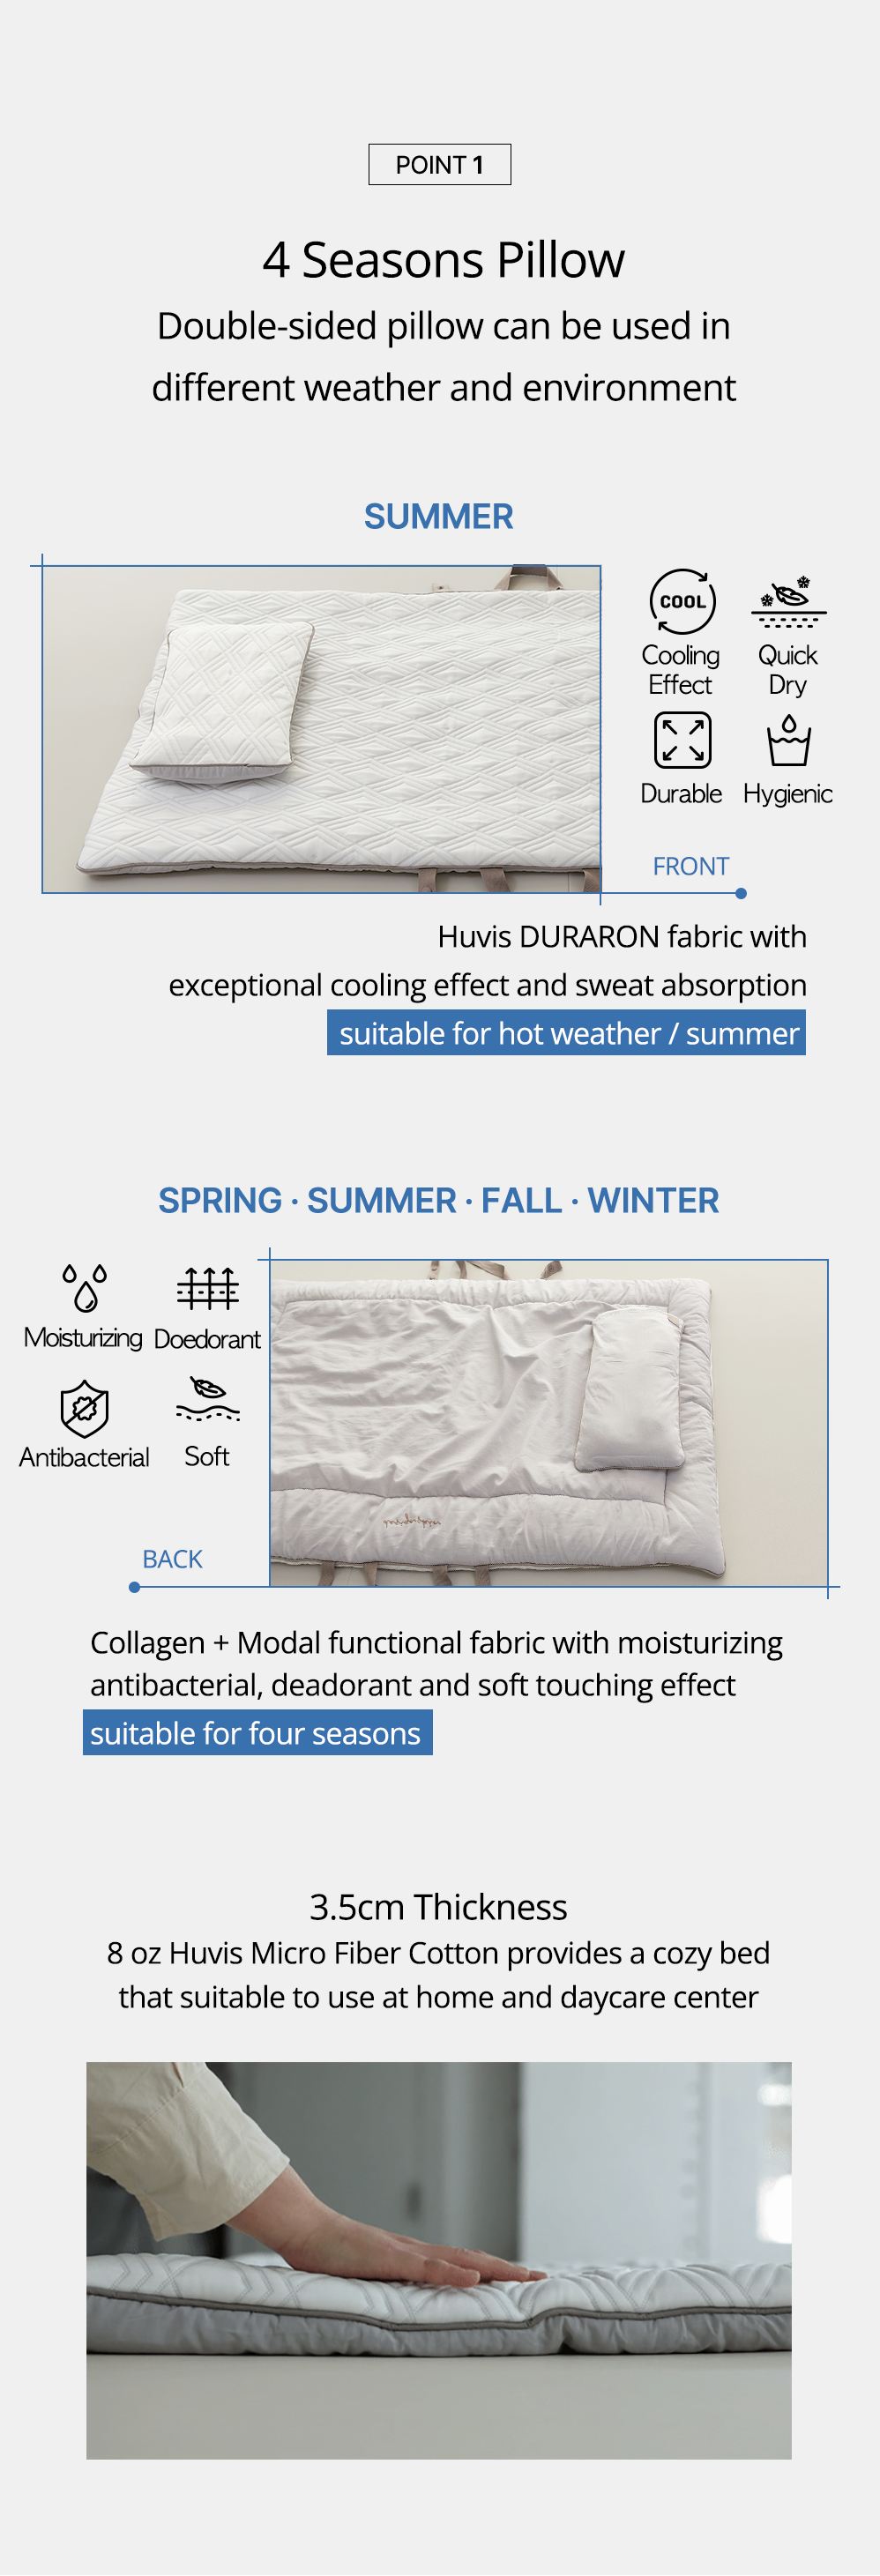 Designskin Baby Cooling Nap Pad double-sided usage